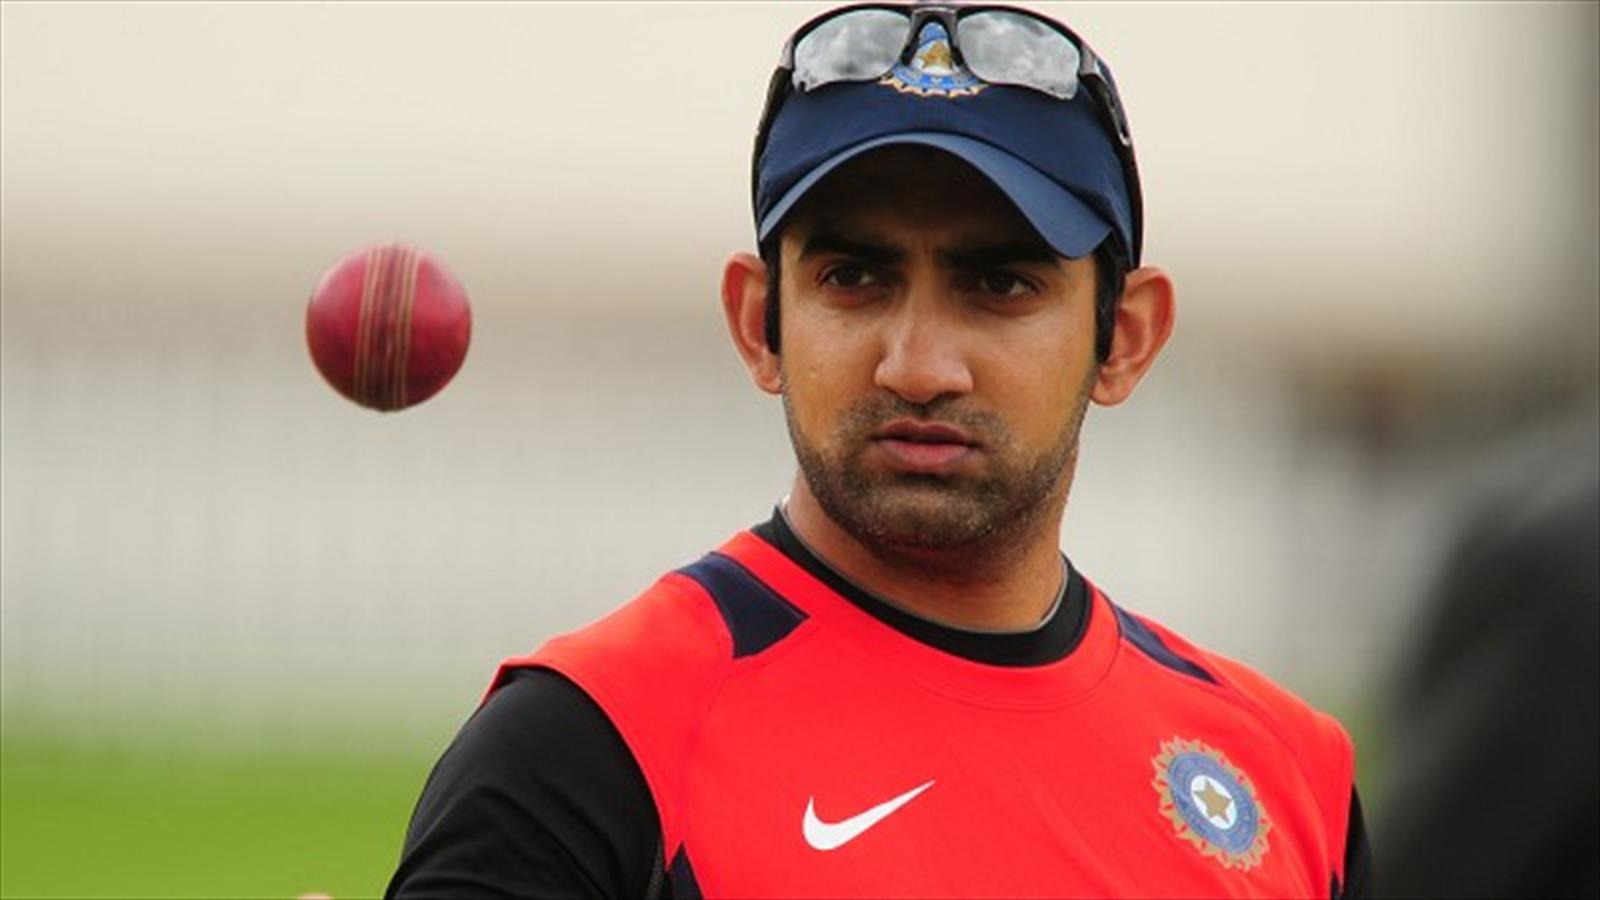 Gautam Gambhir says country comes first, there shouldnt be any cricket match with Pak